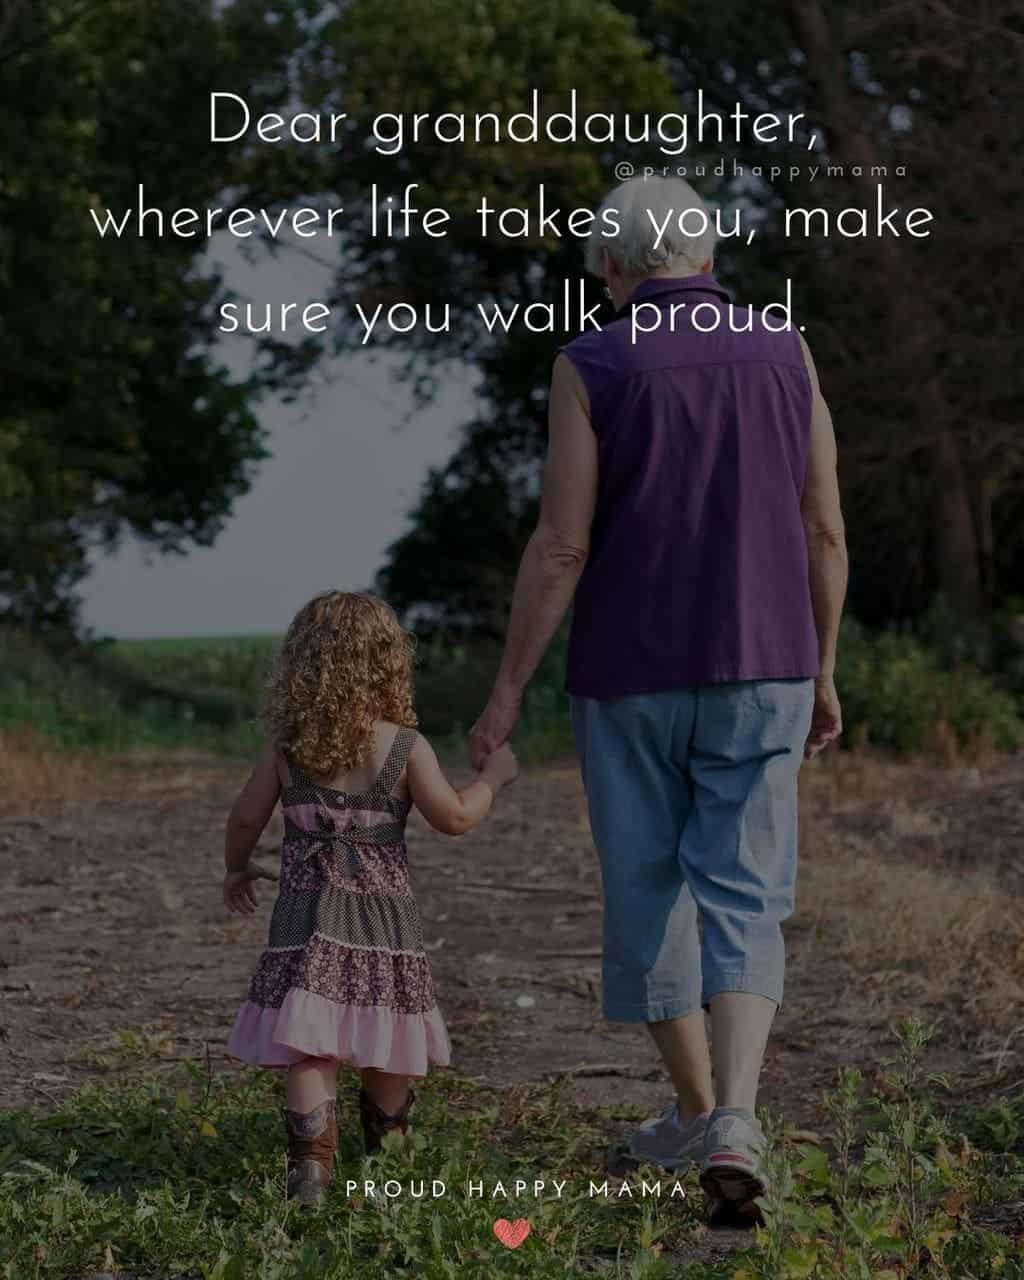 Granddaughter Quotes - Dear granddaughter, wherever life takes you, make sure you walk proud.’